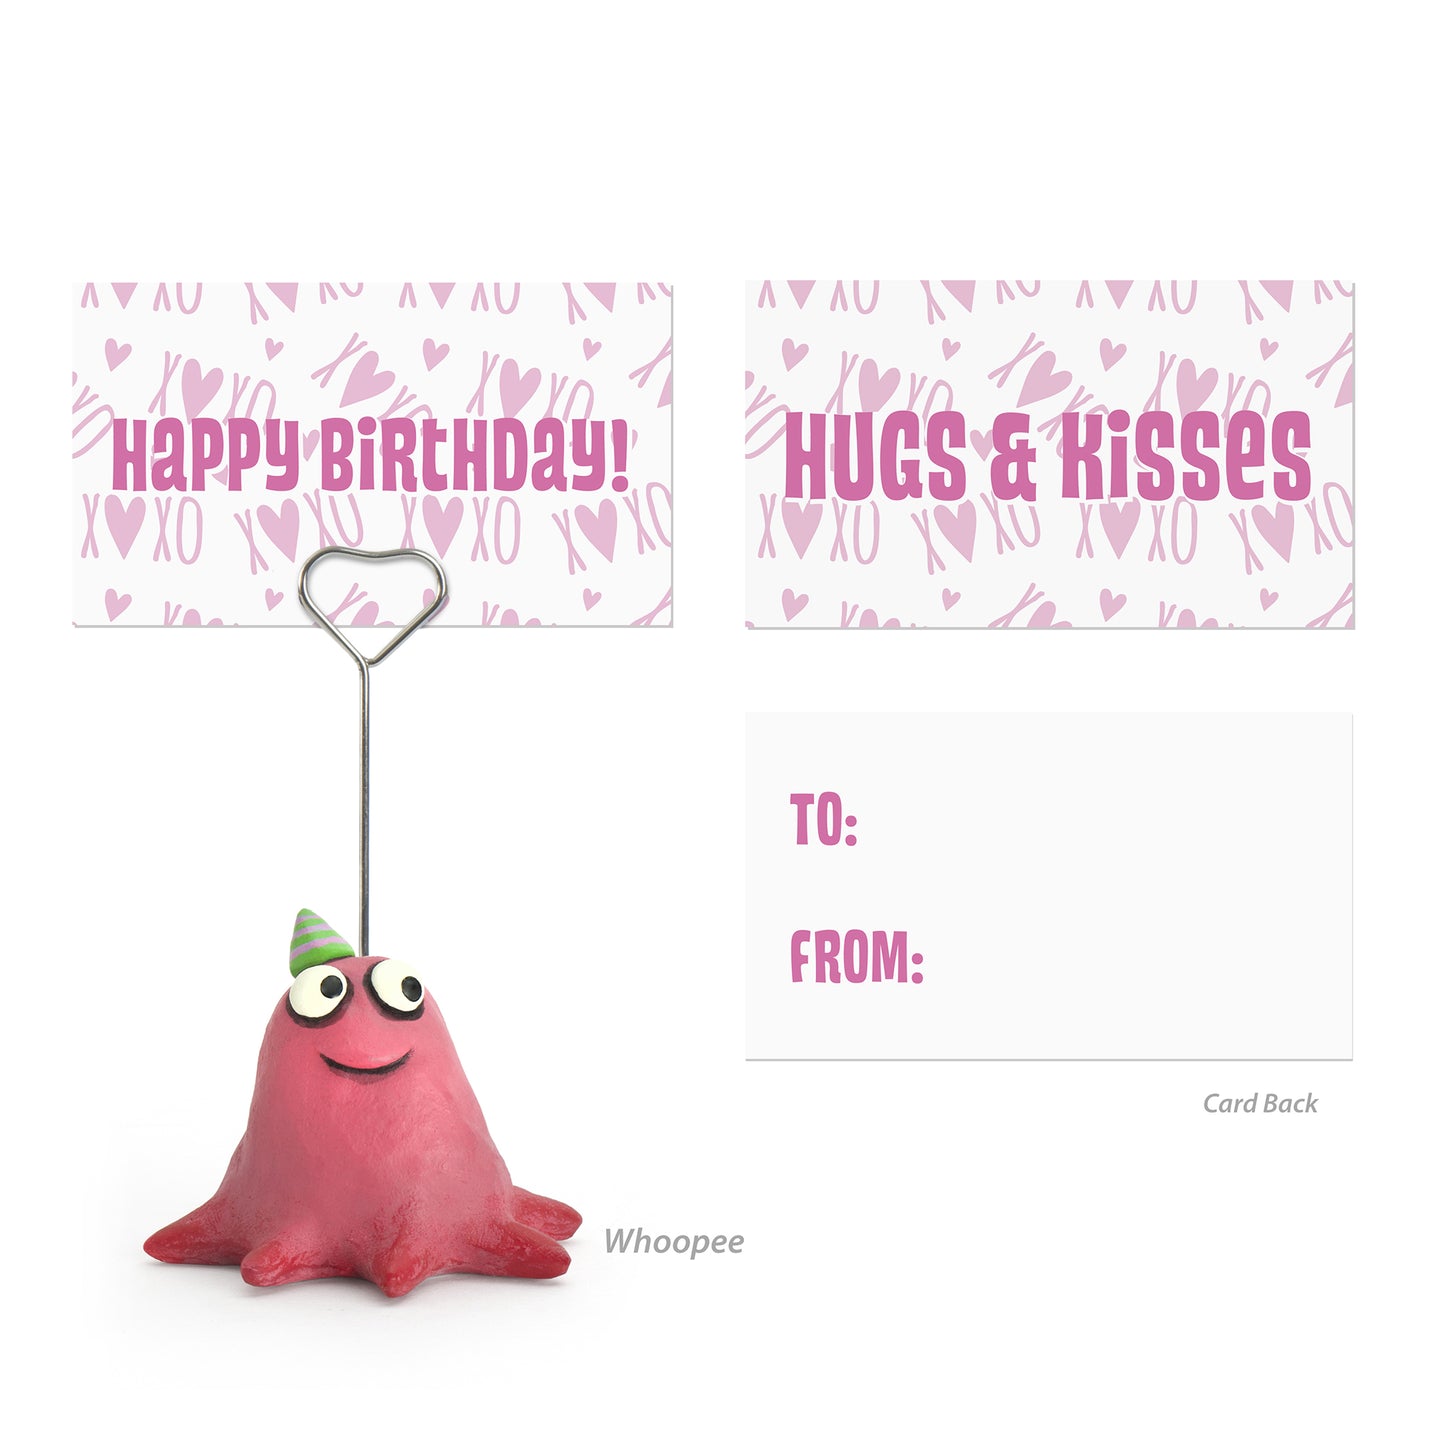 Whoopee the Party Blob - Comes with 2 greeting cards!